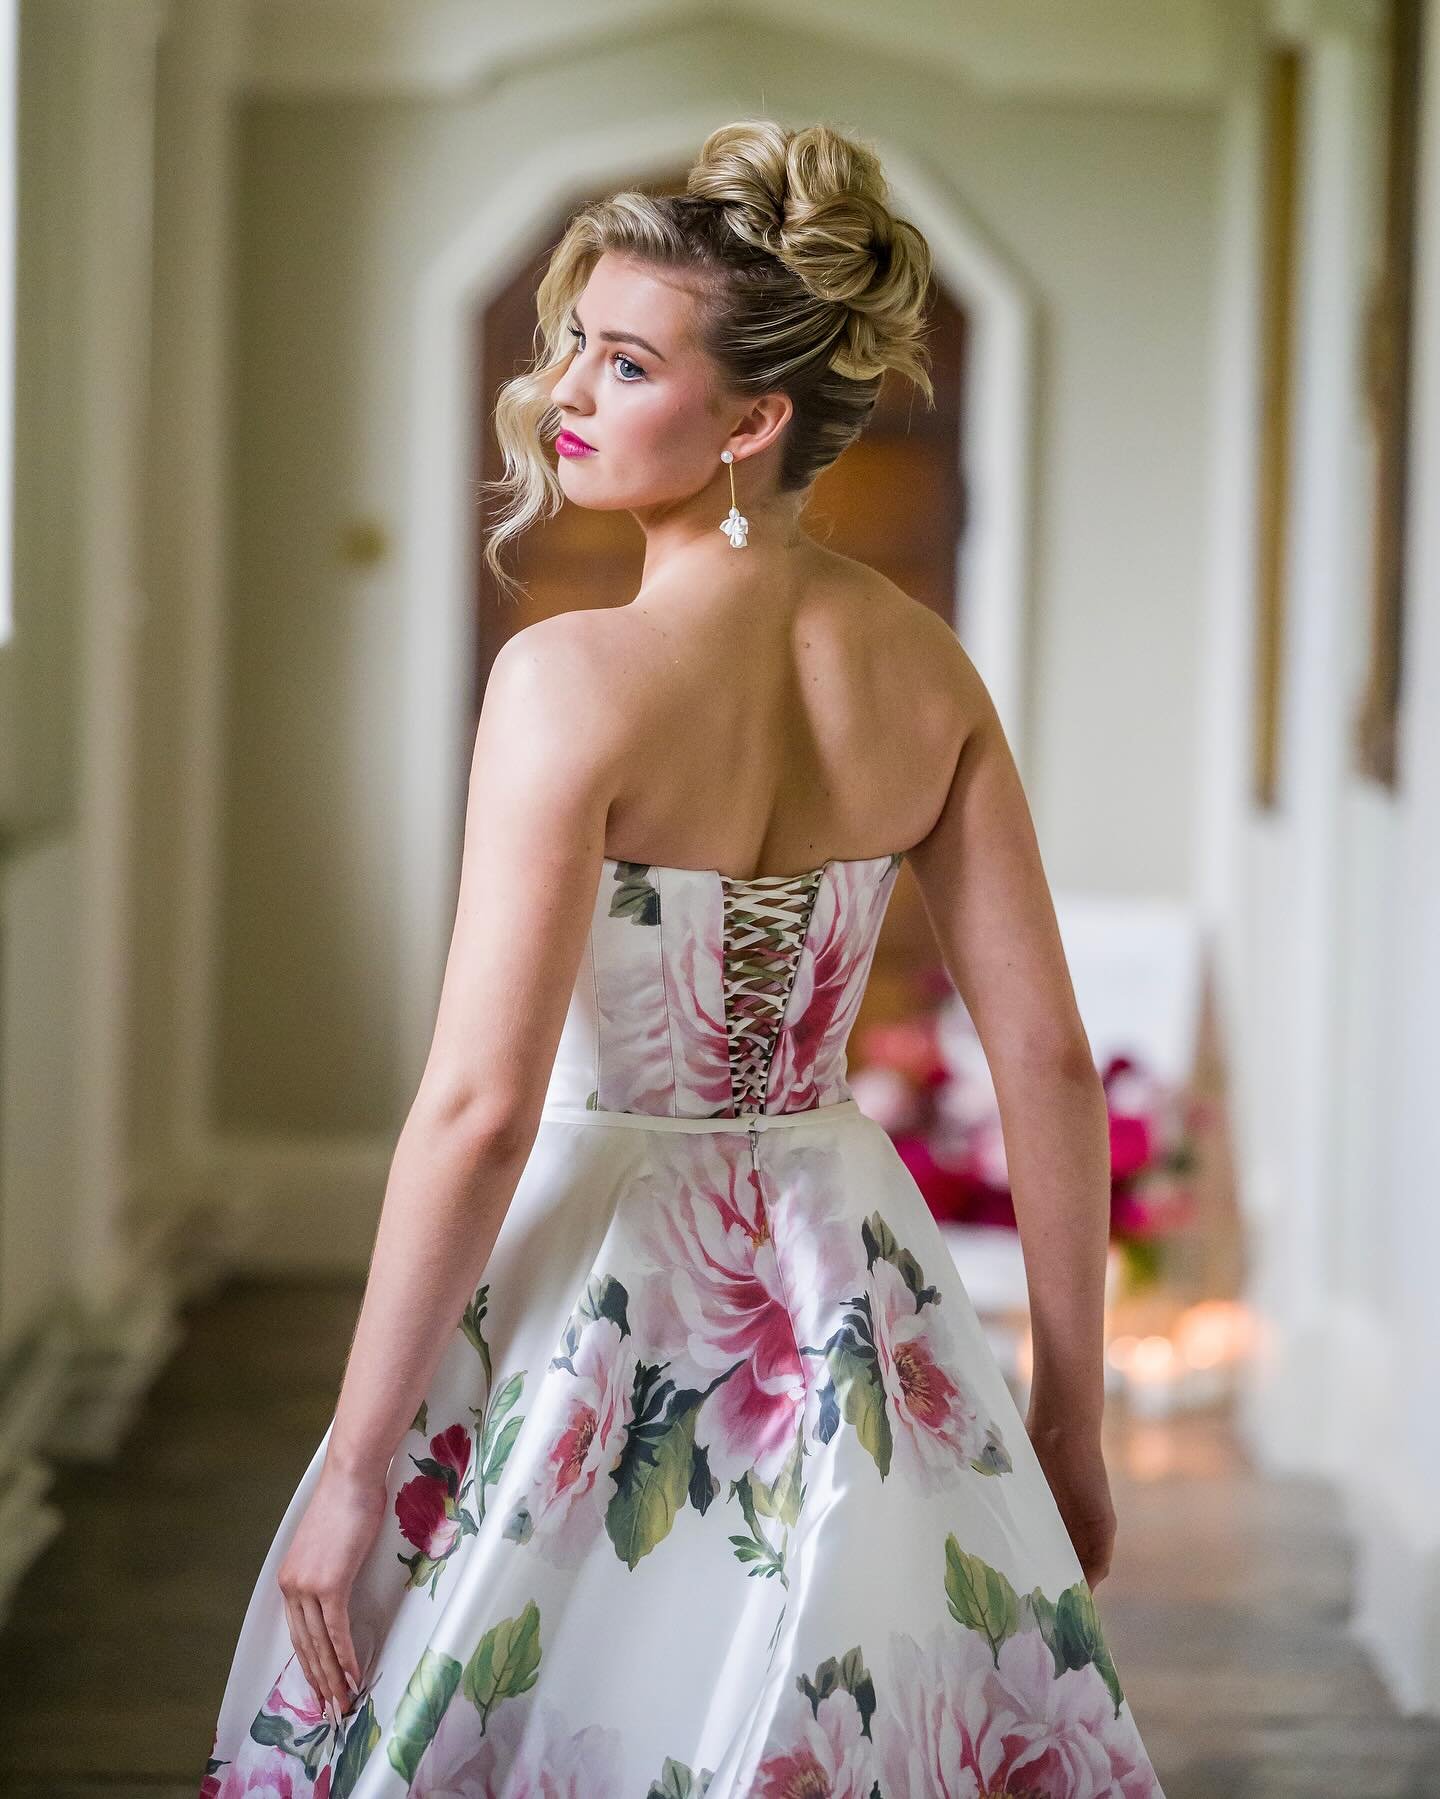 T H O R N 

A dress where you can boldly, be you ❤️

A brand new addition to our @houseofsavin collection ~ due in store very soon! 

Photographed and styled to perfection during our most recent styled shoot ~ see credits for details 🦋

Shoot credit